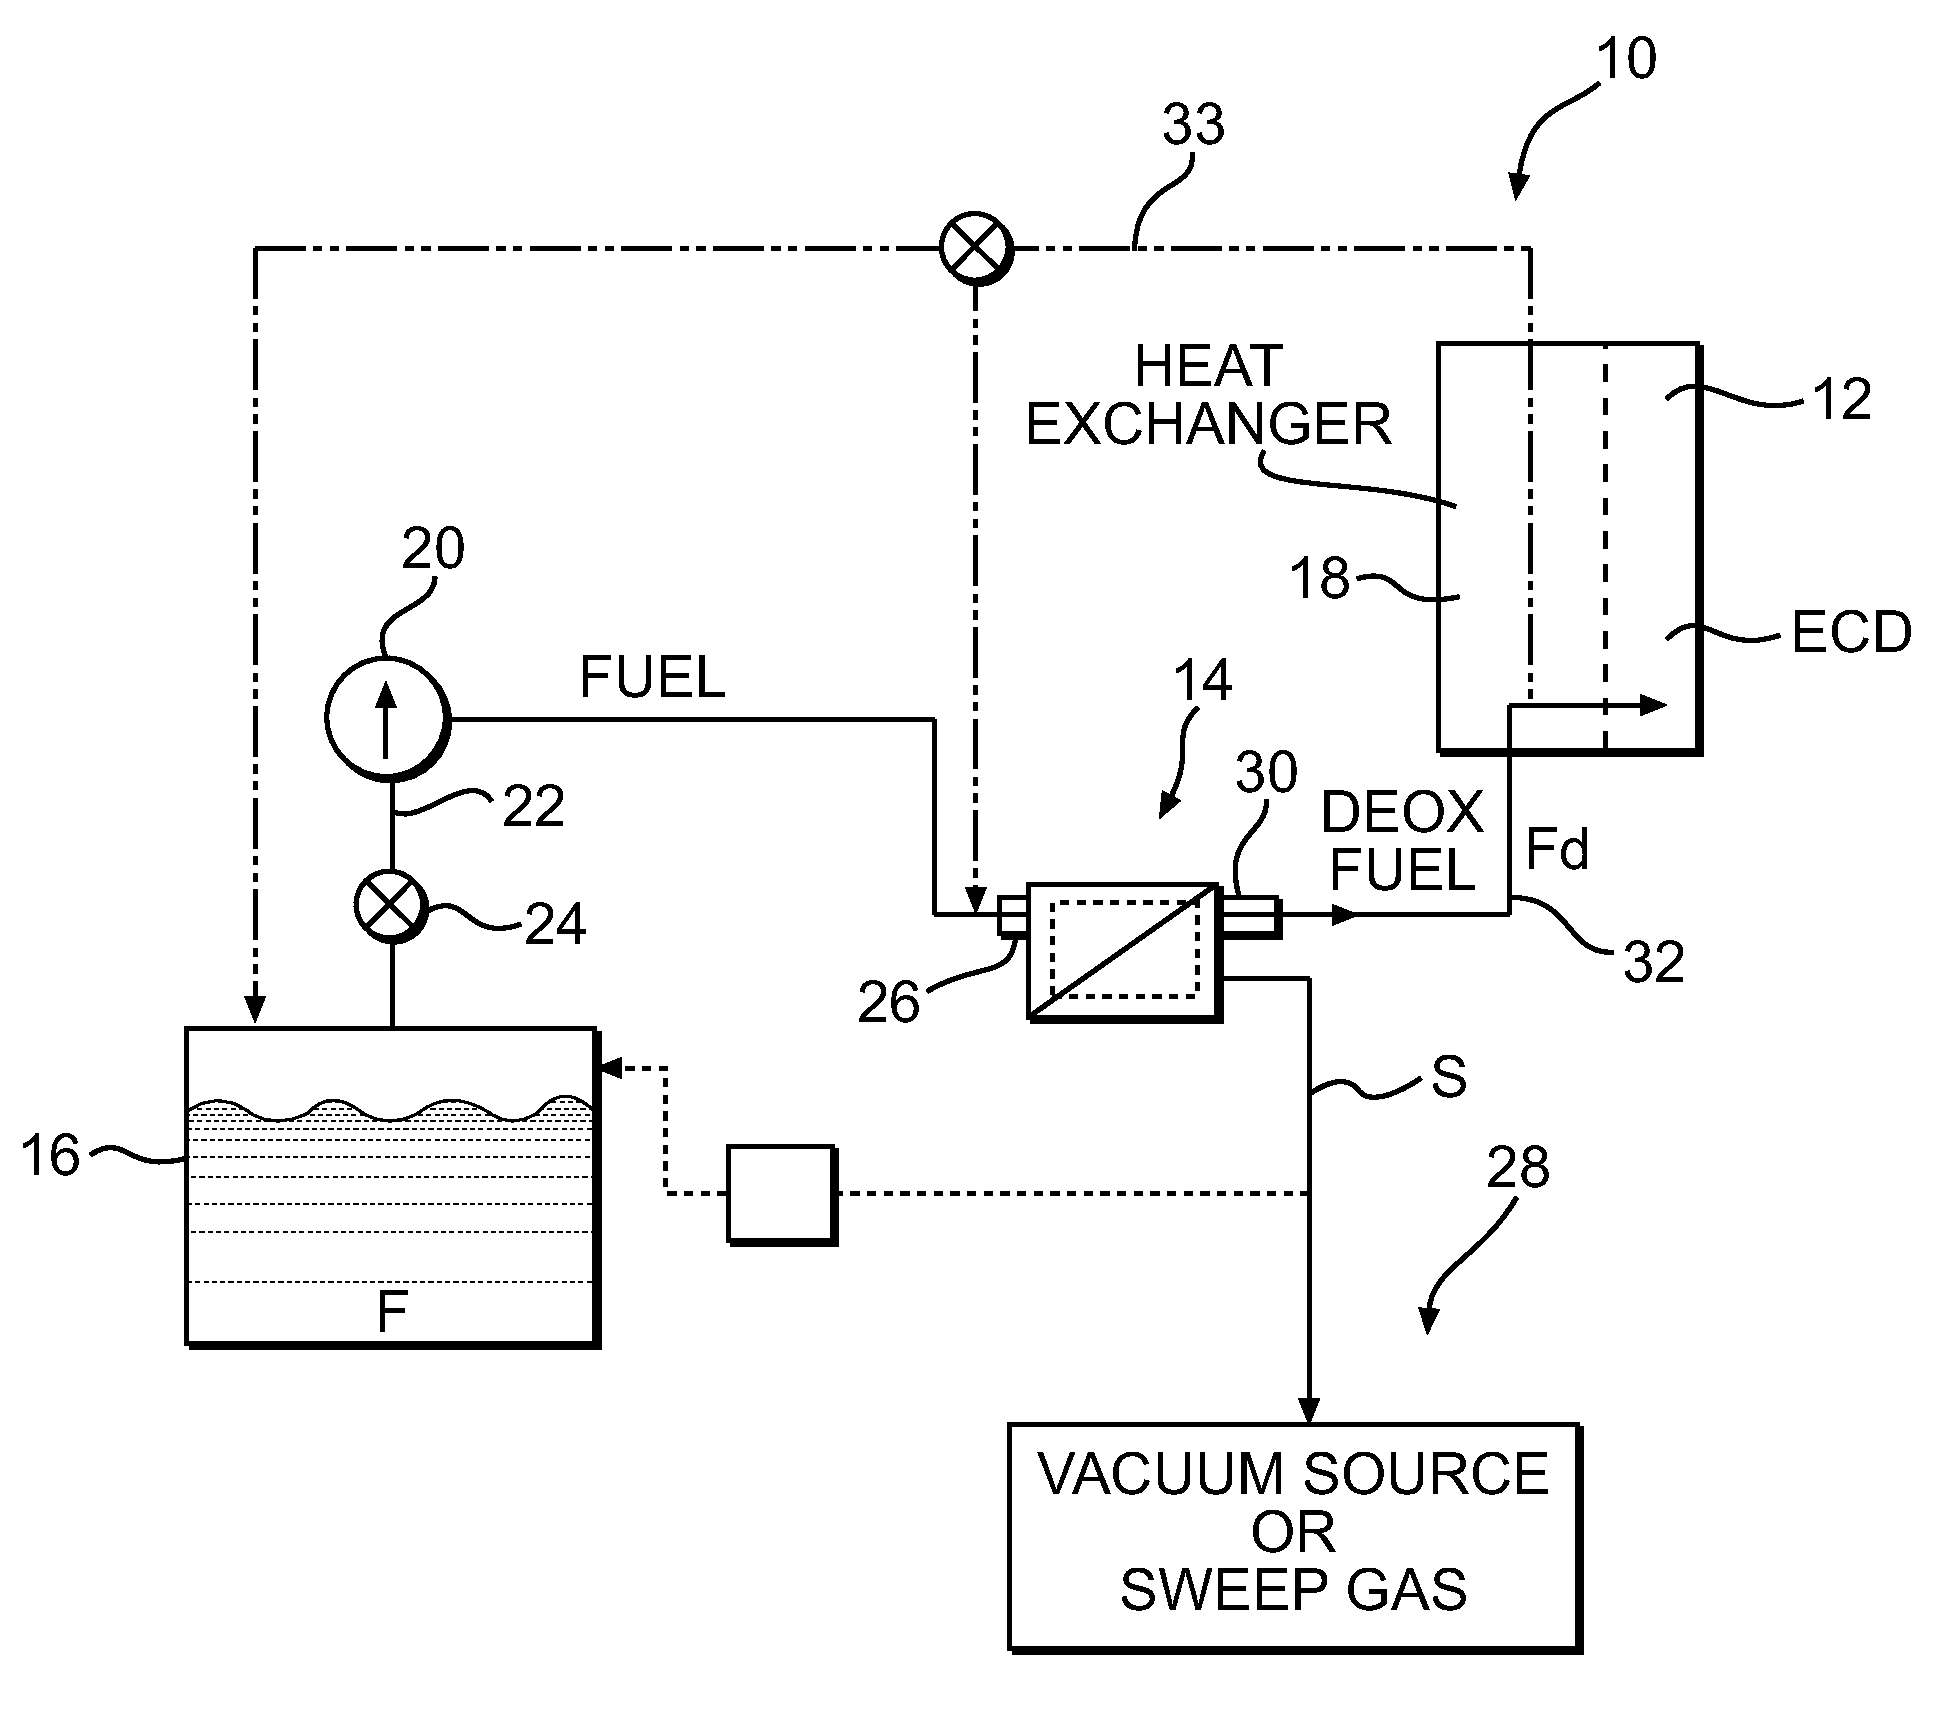 Fuel deoxygenator with porous support plate